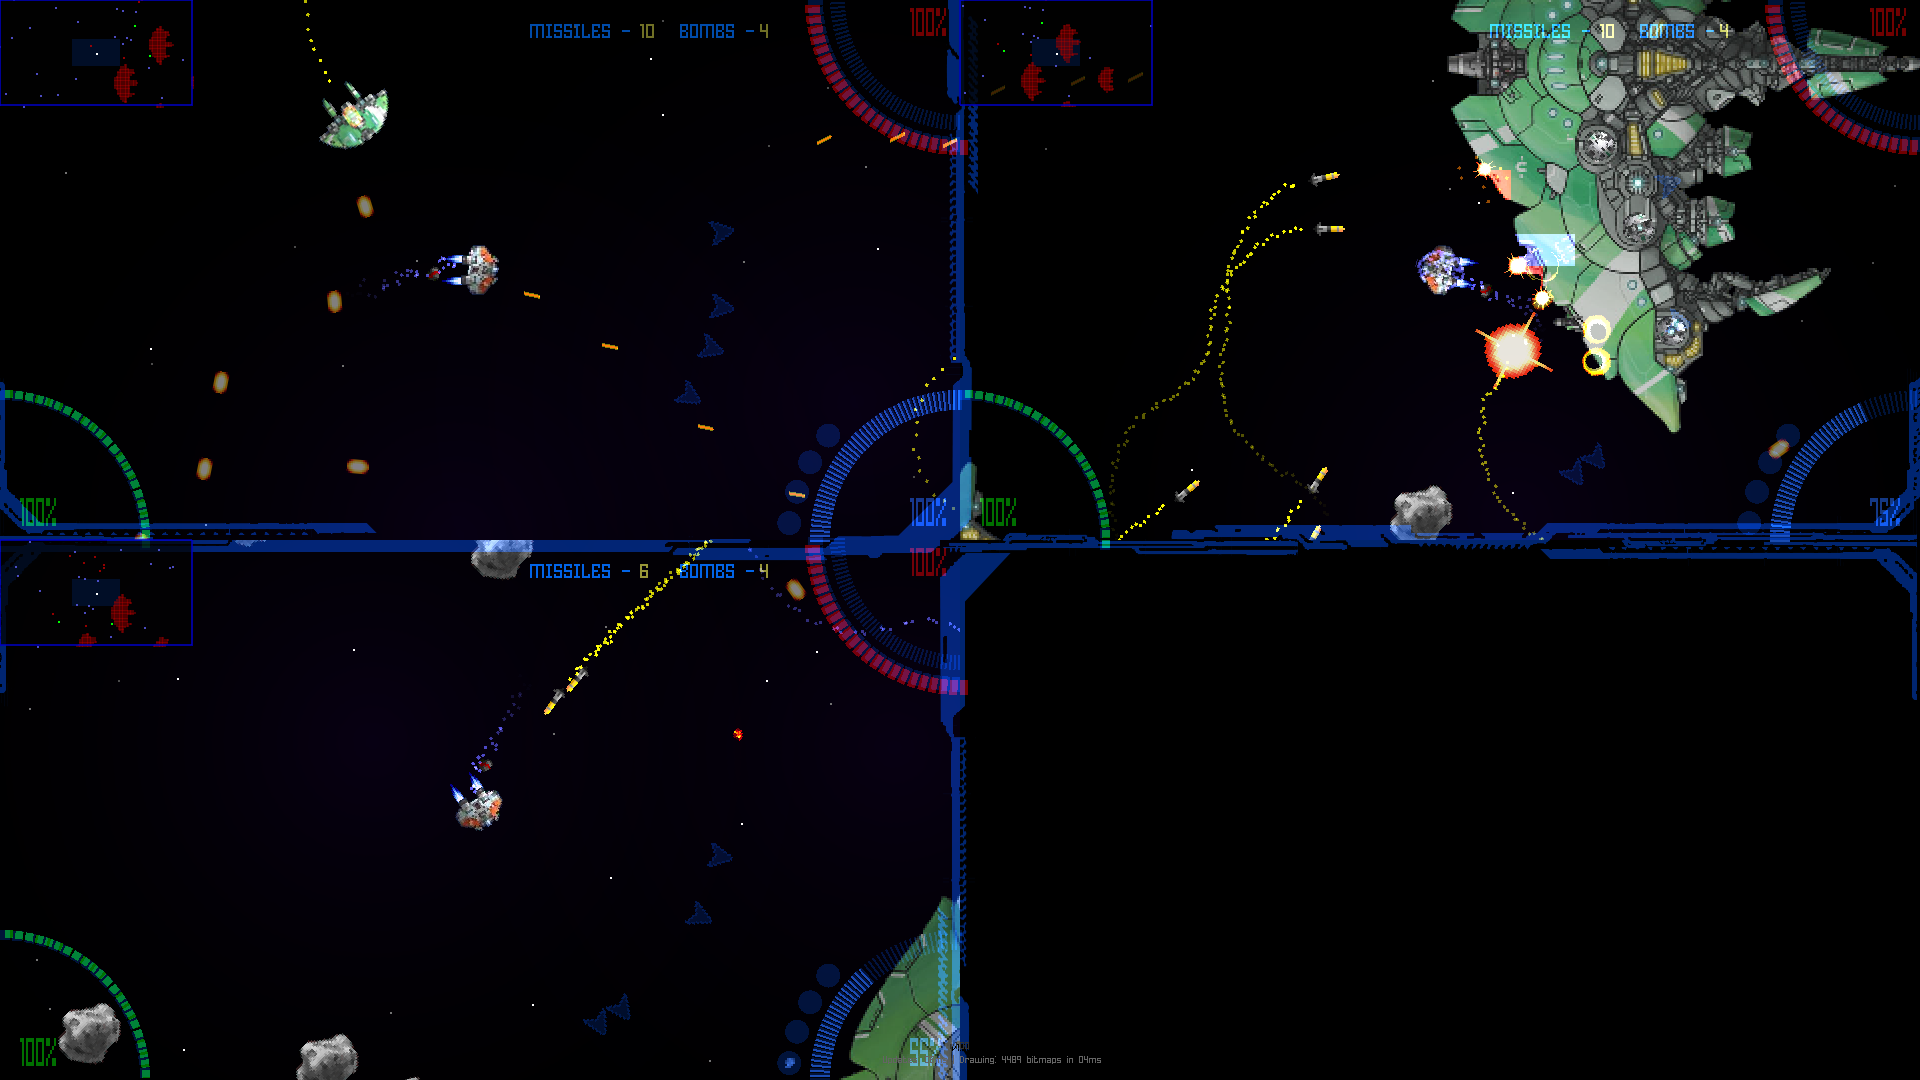 2D Multiplayer Space Video Game